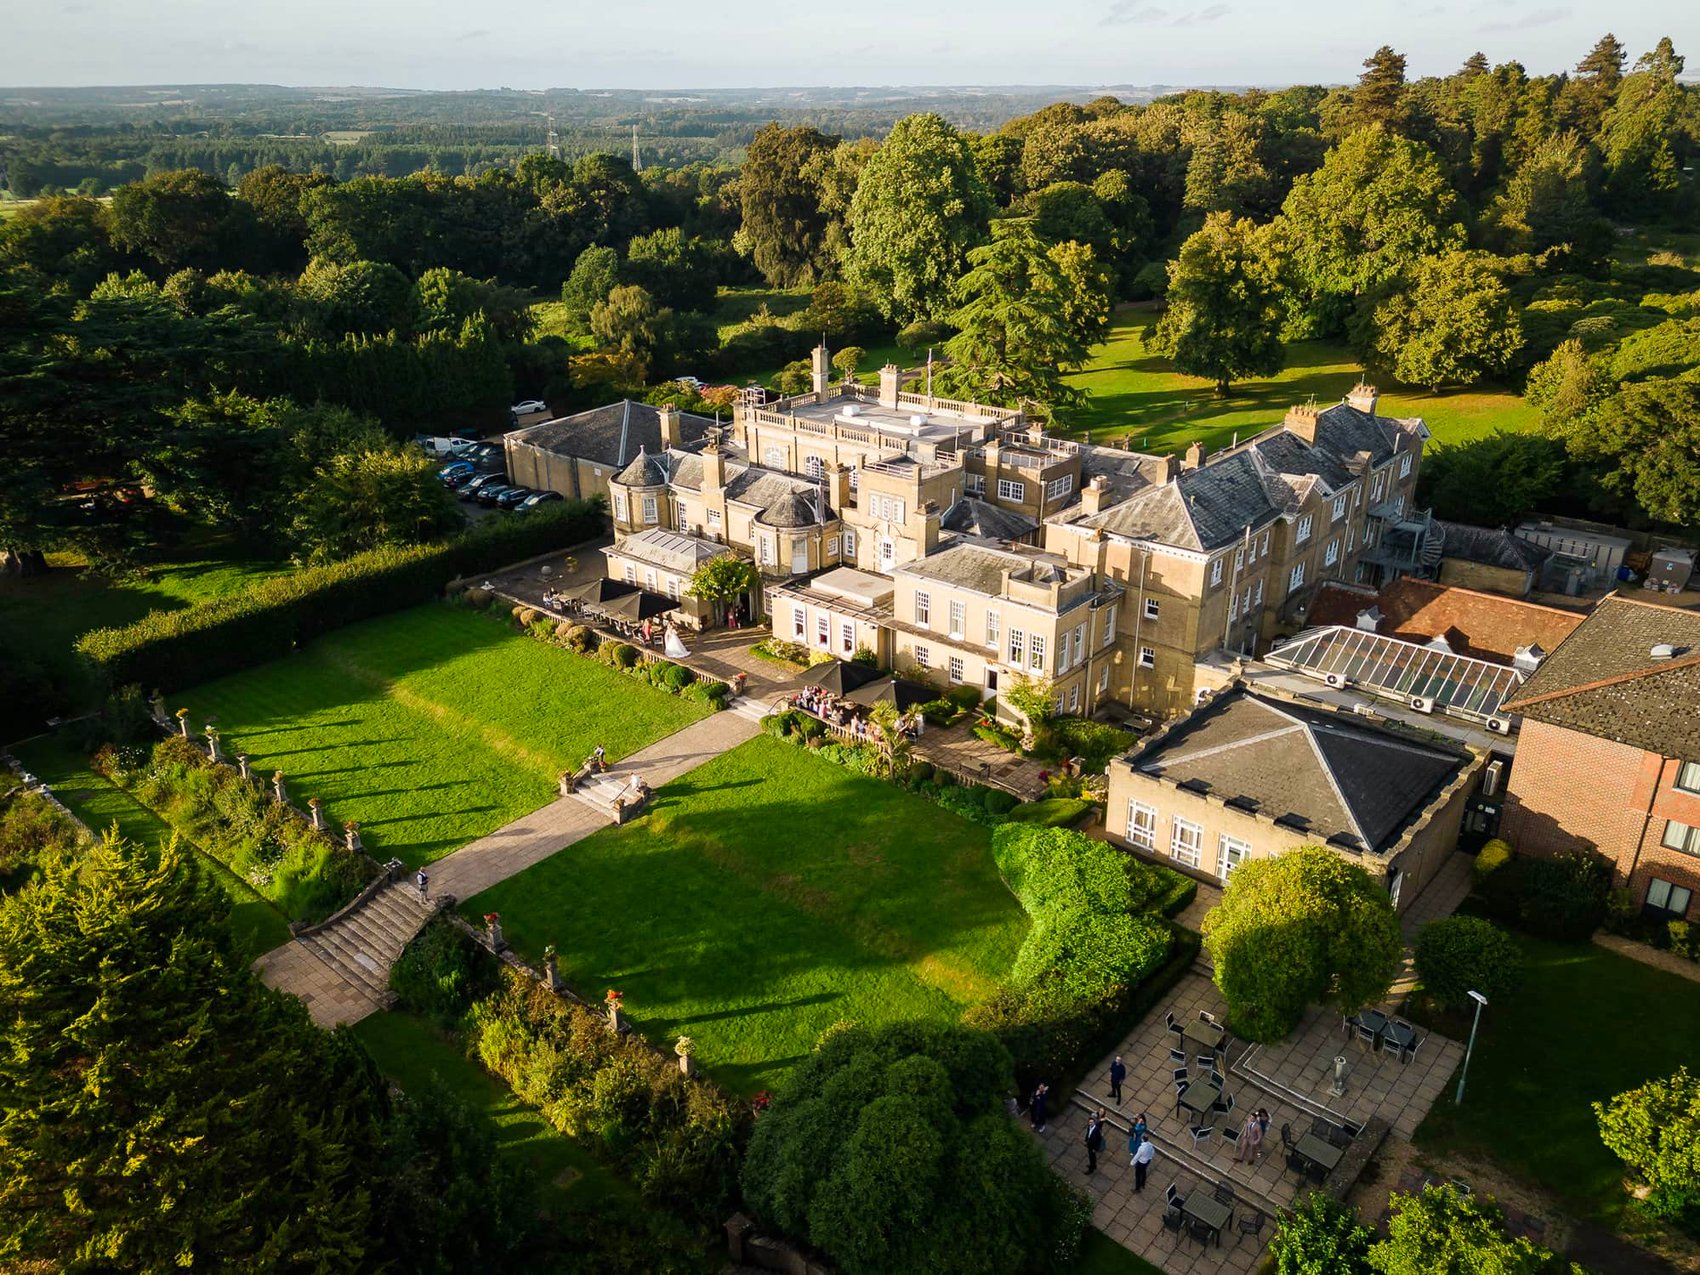 Chilworth Manor Hotel from the air in evening light